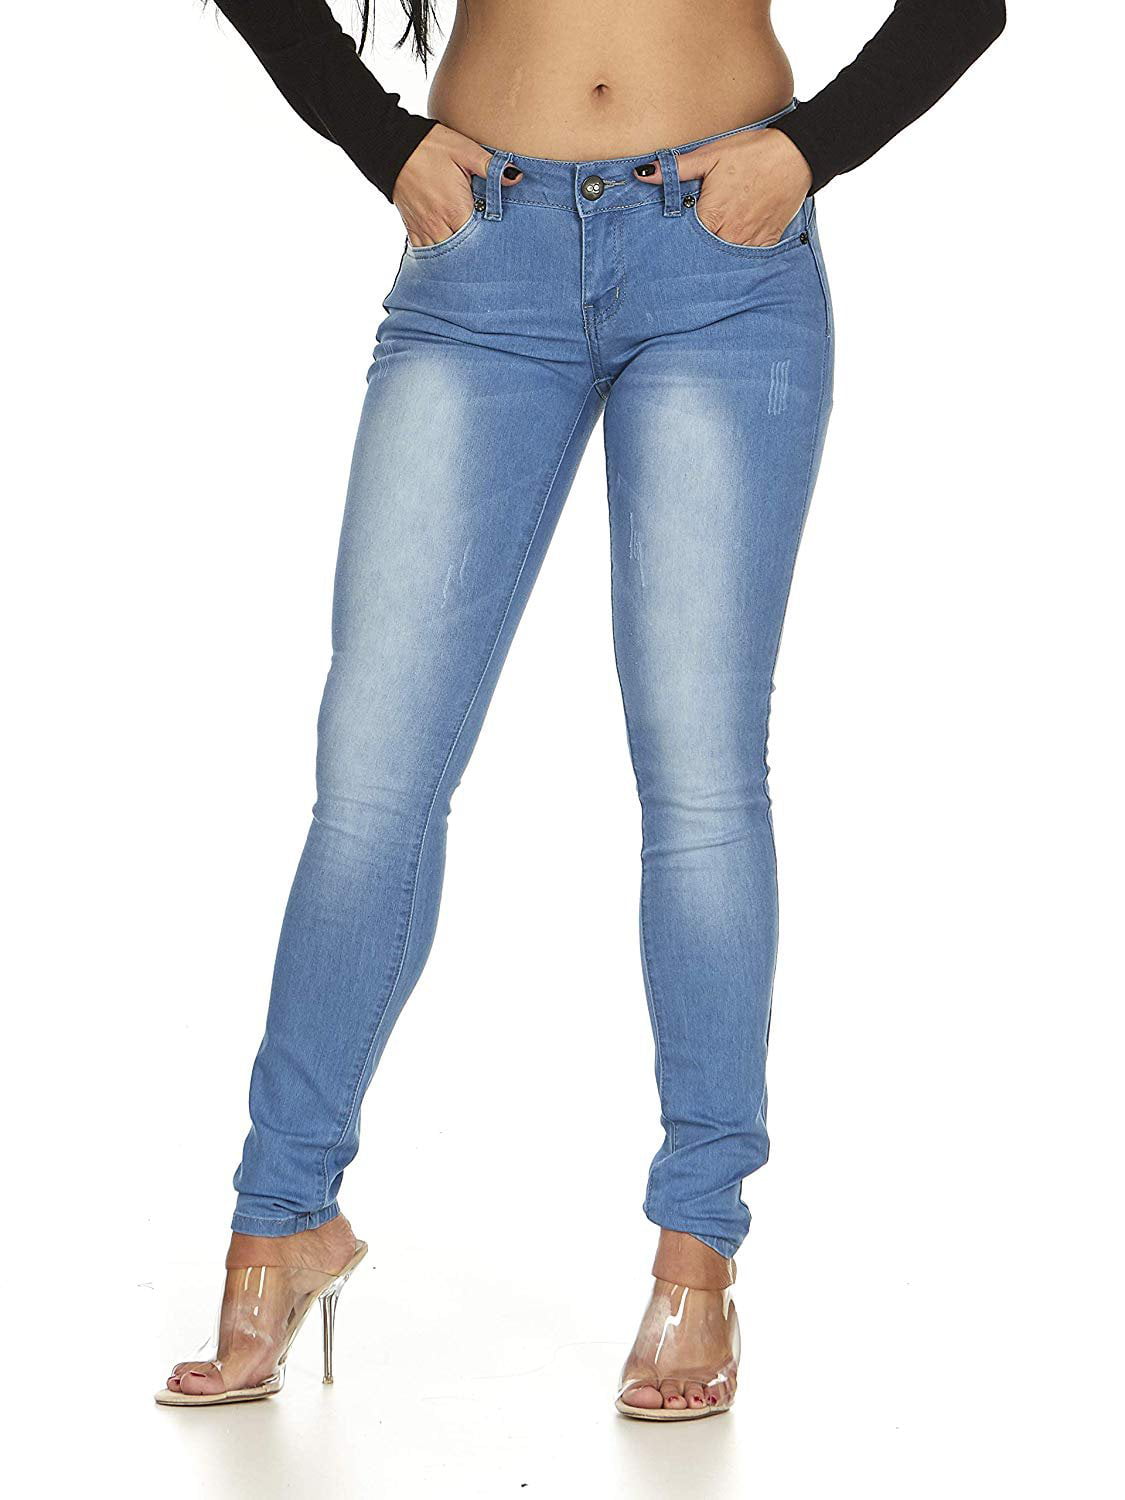 7 Jeans Jeans Sizes Fit Electric Slim Women Stretch Blue Classic Juniors Stone Washed for Skinny